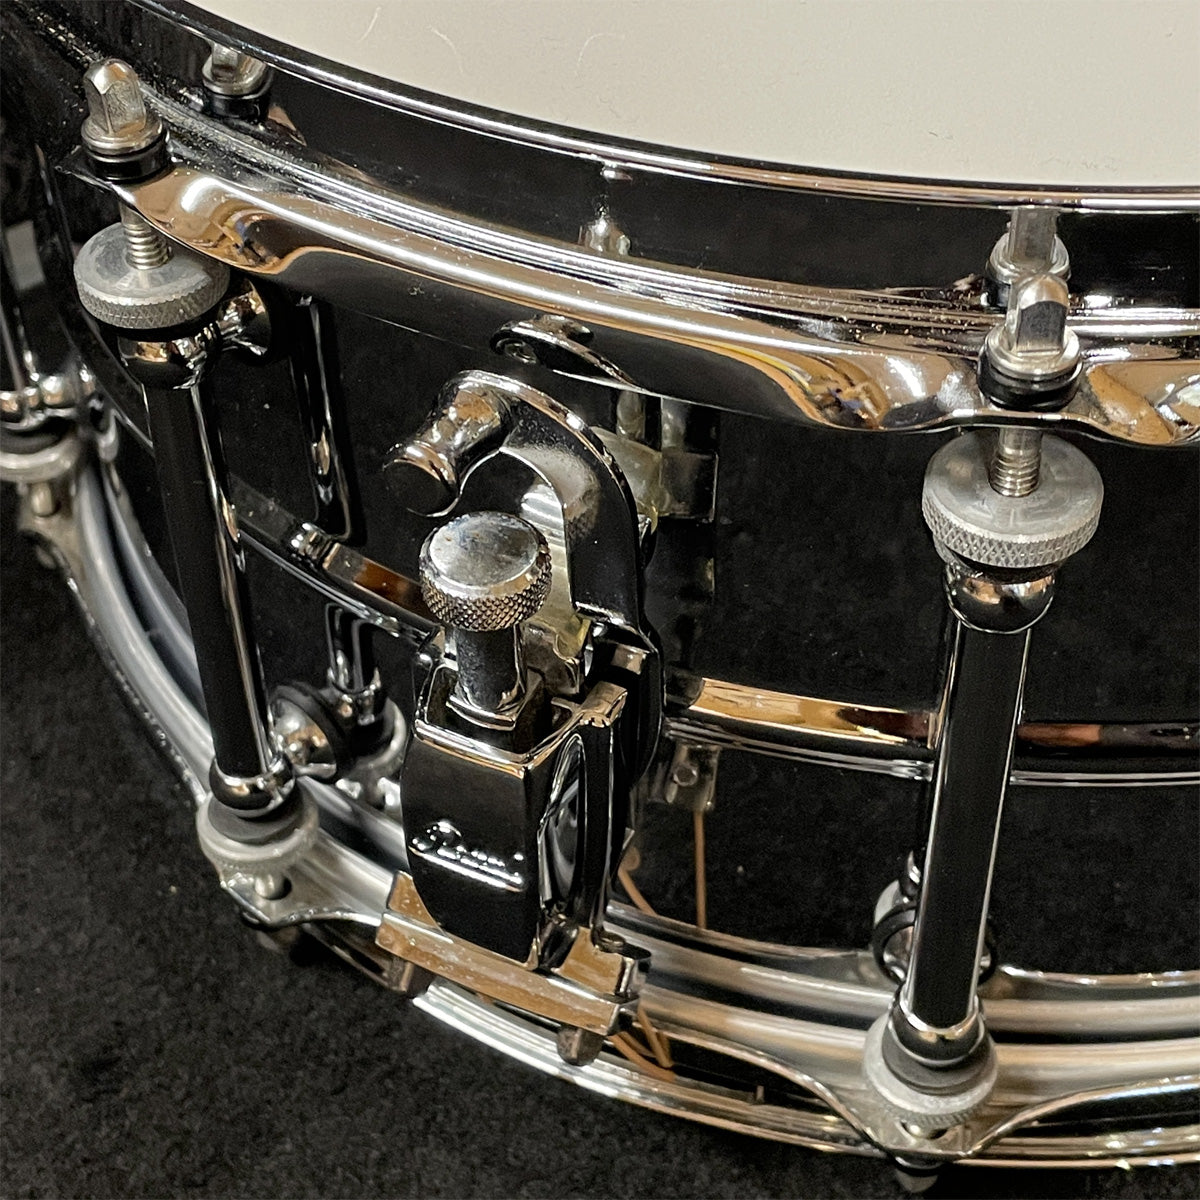 Pre-Owned Pearl Signature Ian Paice 14"x6.5" Steel Snare (Serial Number #000003)